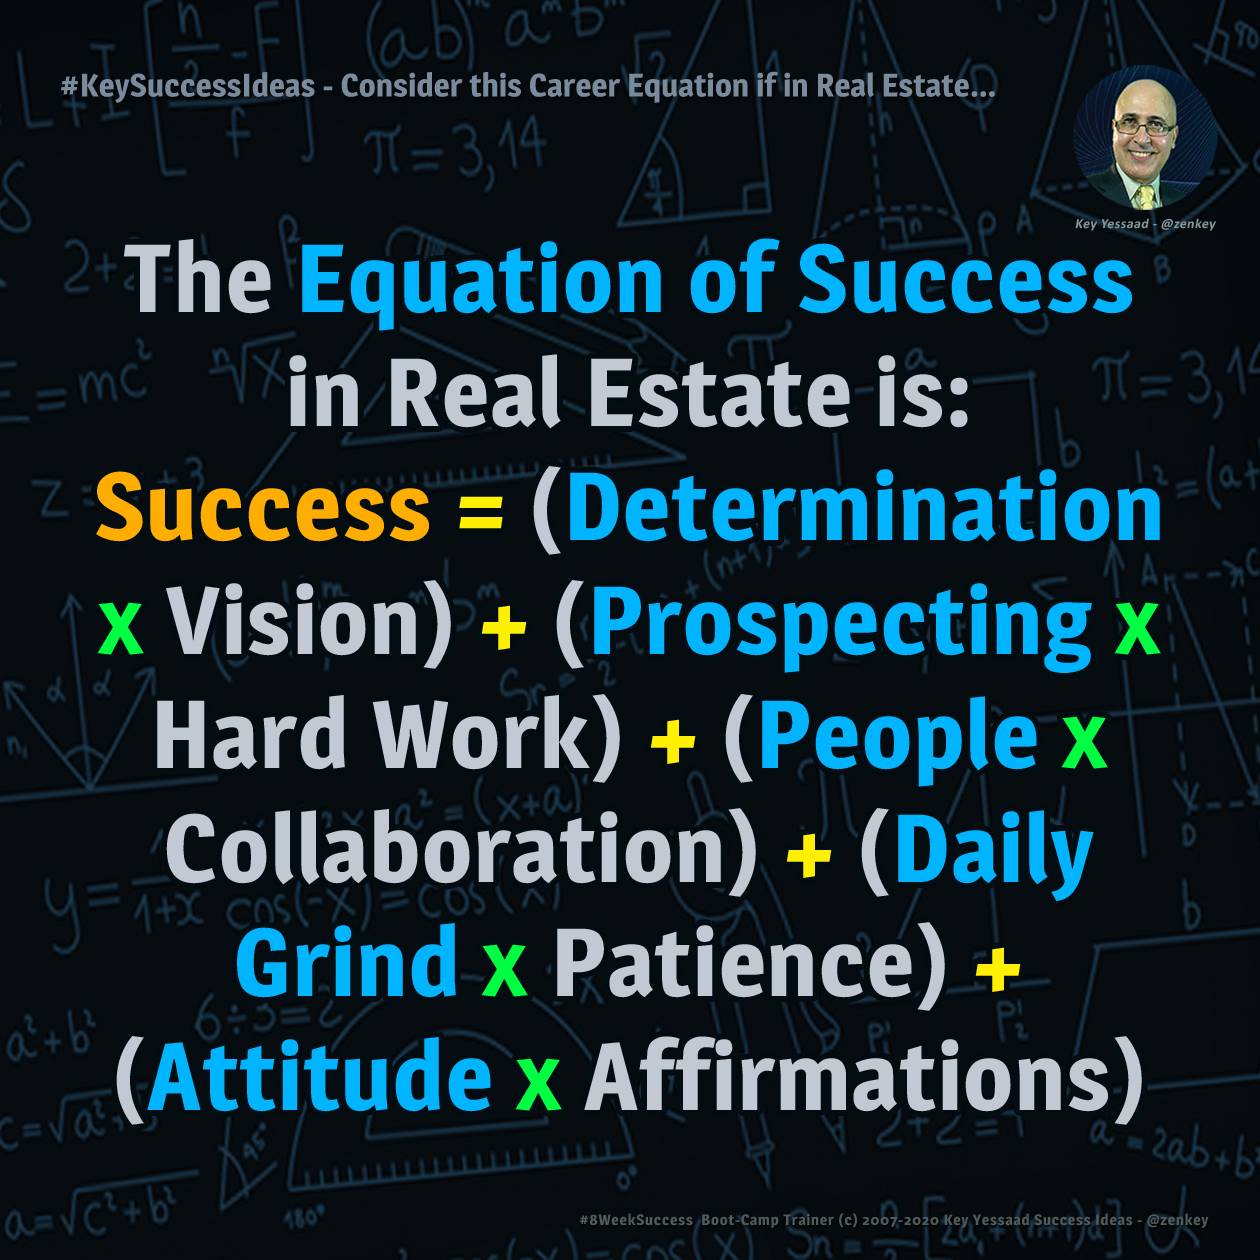 Consider this Career Equation if in Real Estate? - #KeySuccessIdeas